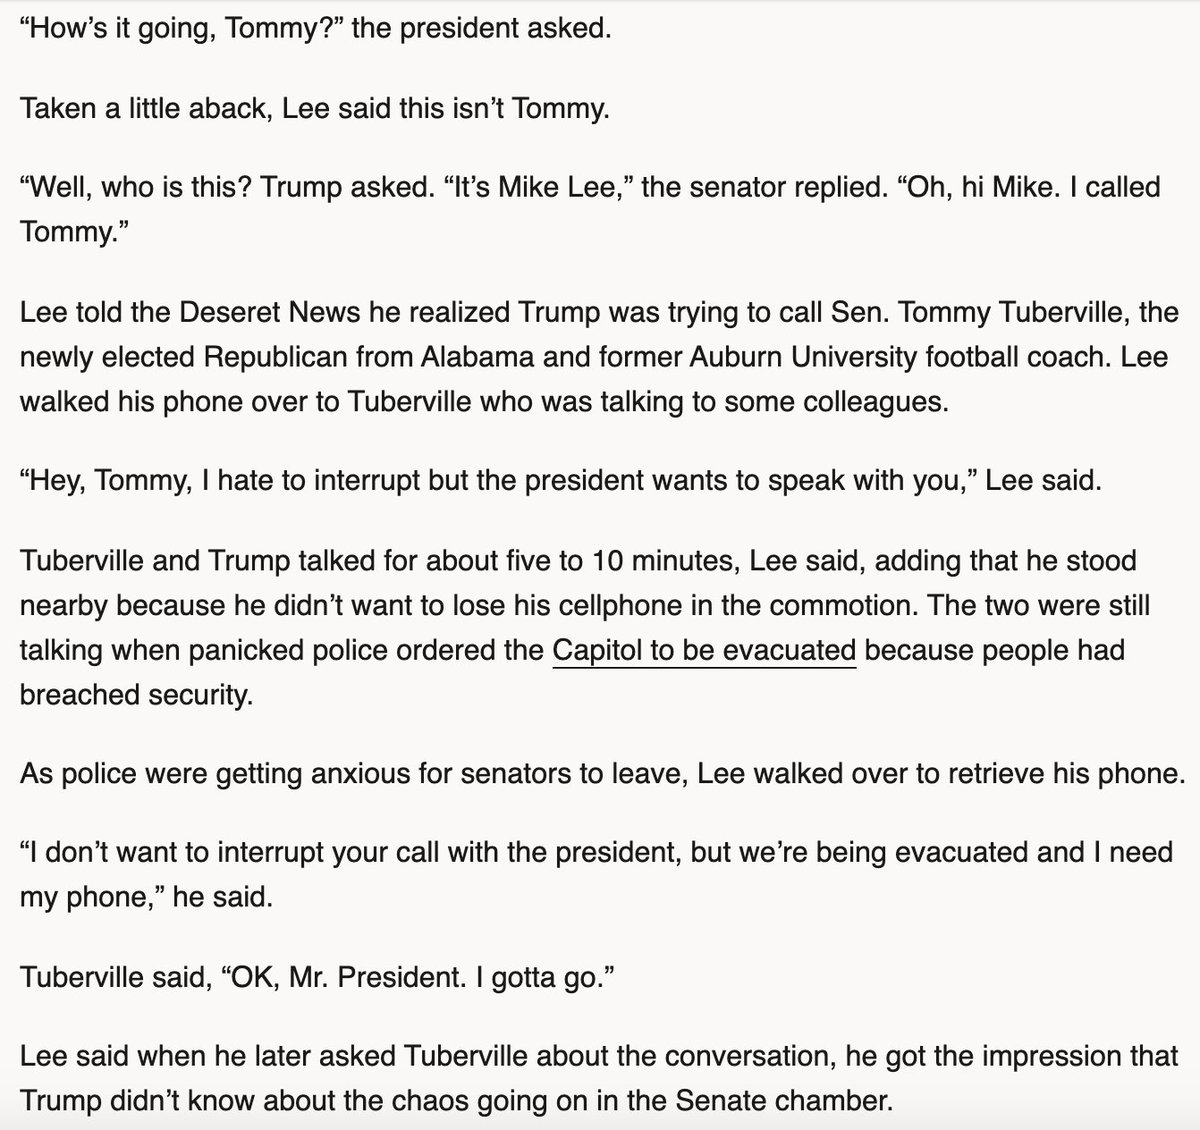 1/6, ~2:08: Trump calls Lee. It appears my timing for Lee's call is off. It appears that the president called him between 2:03 and 2:08 since the senators were rushed off at 2:13. I had originally placed it at 2:15 just after the senators left the floor.  https://web.archive.org/web/20210114014151if_/https://www.deseret.com/utah/2021/1/7/22218897/donald-trump-mike-lee-misdial-capitol-siege-congress-electoral-insurrection-moore-curtis-stewart